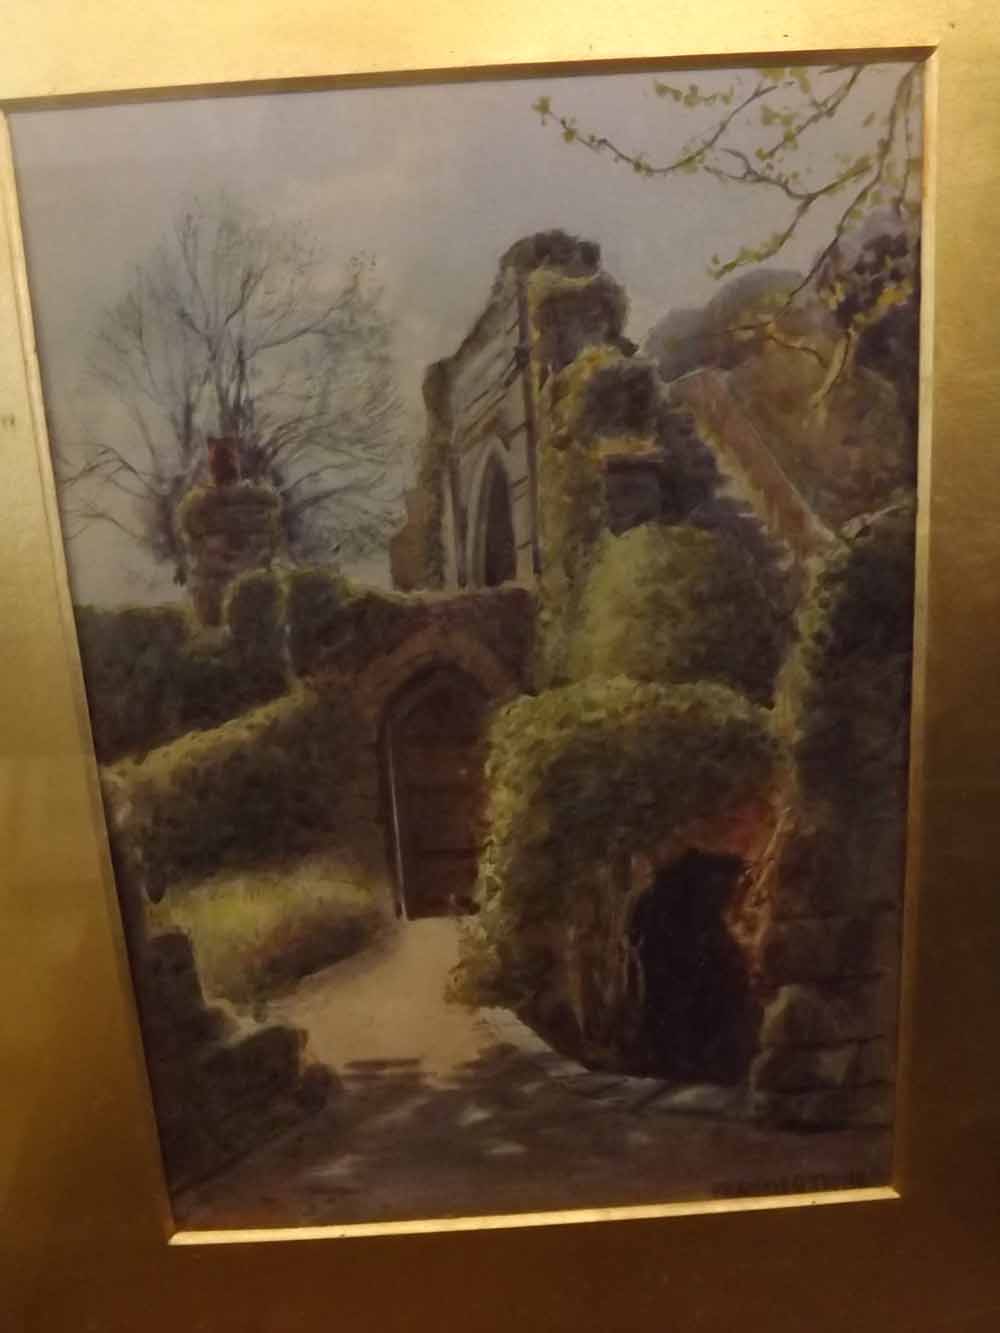 FRANCIS B TIGHE, SIGNED, pair of watercolours, Garden archways, 9 1/2" x 6 1/2" (2) - Image 2 of 2